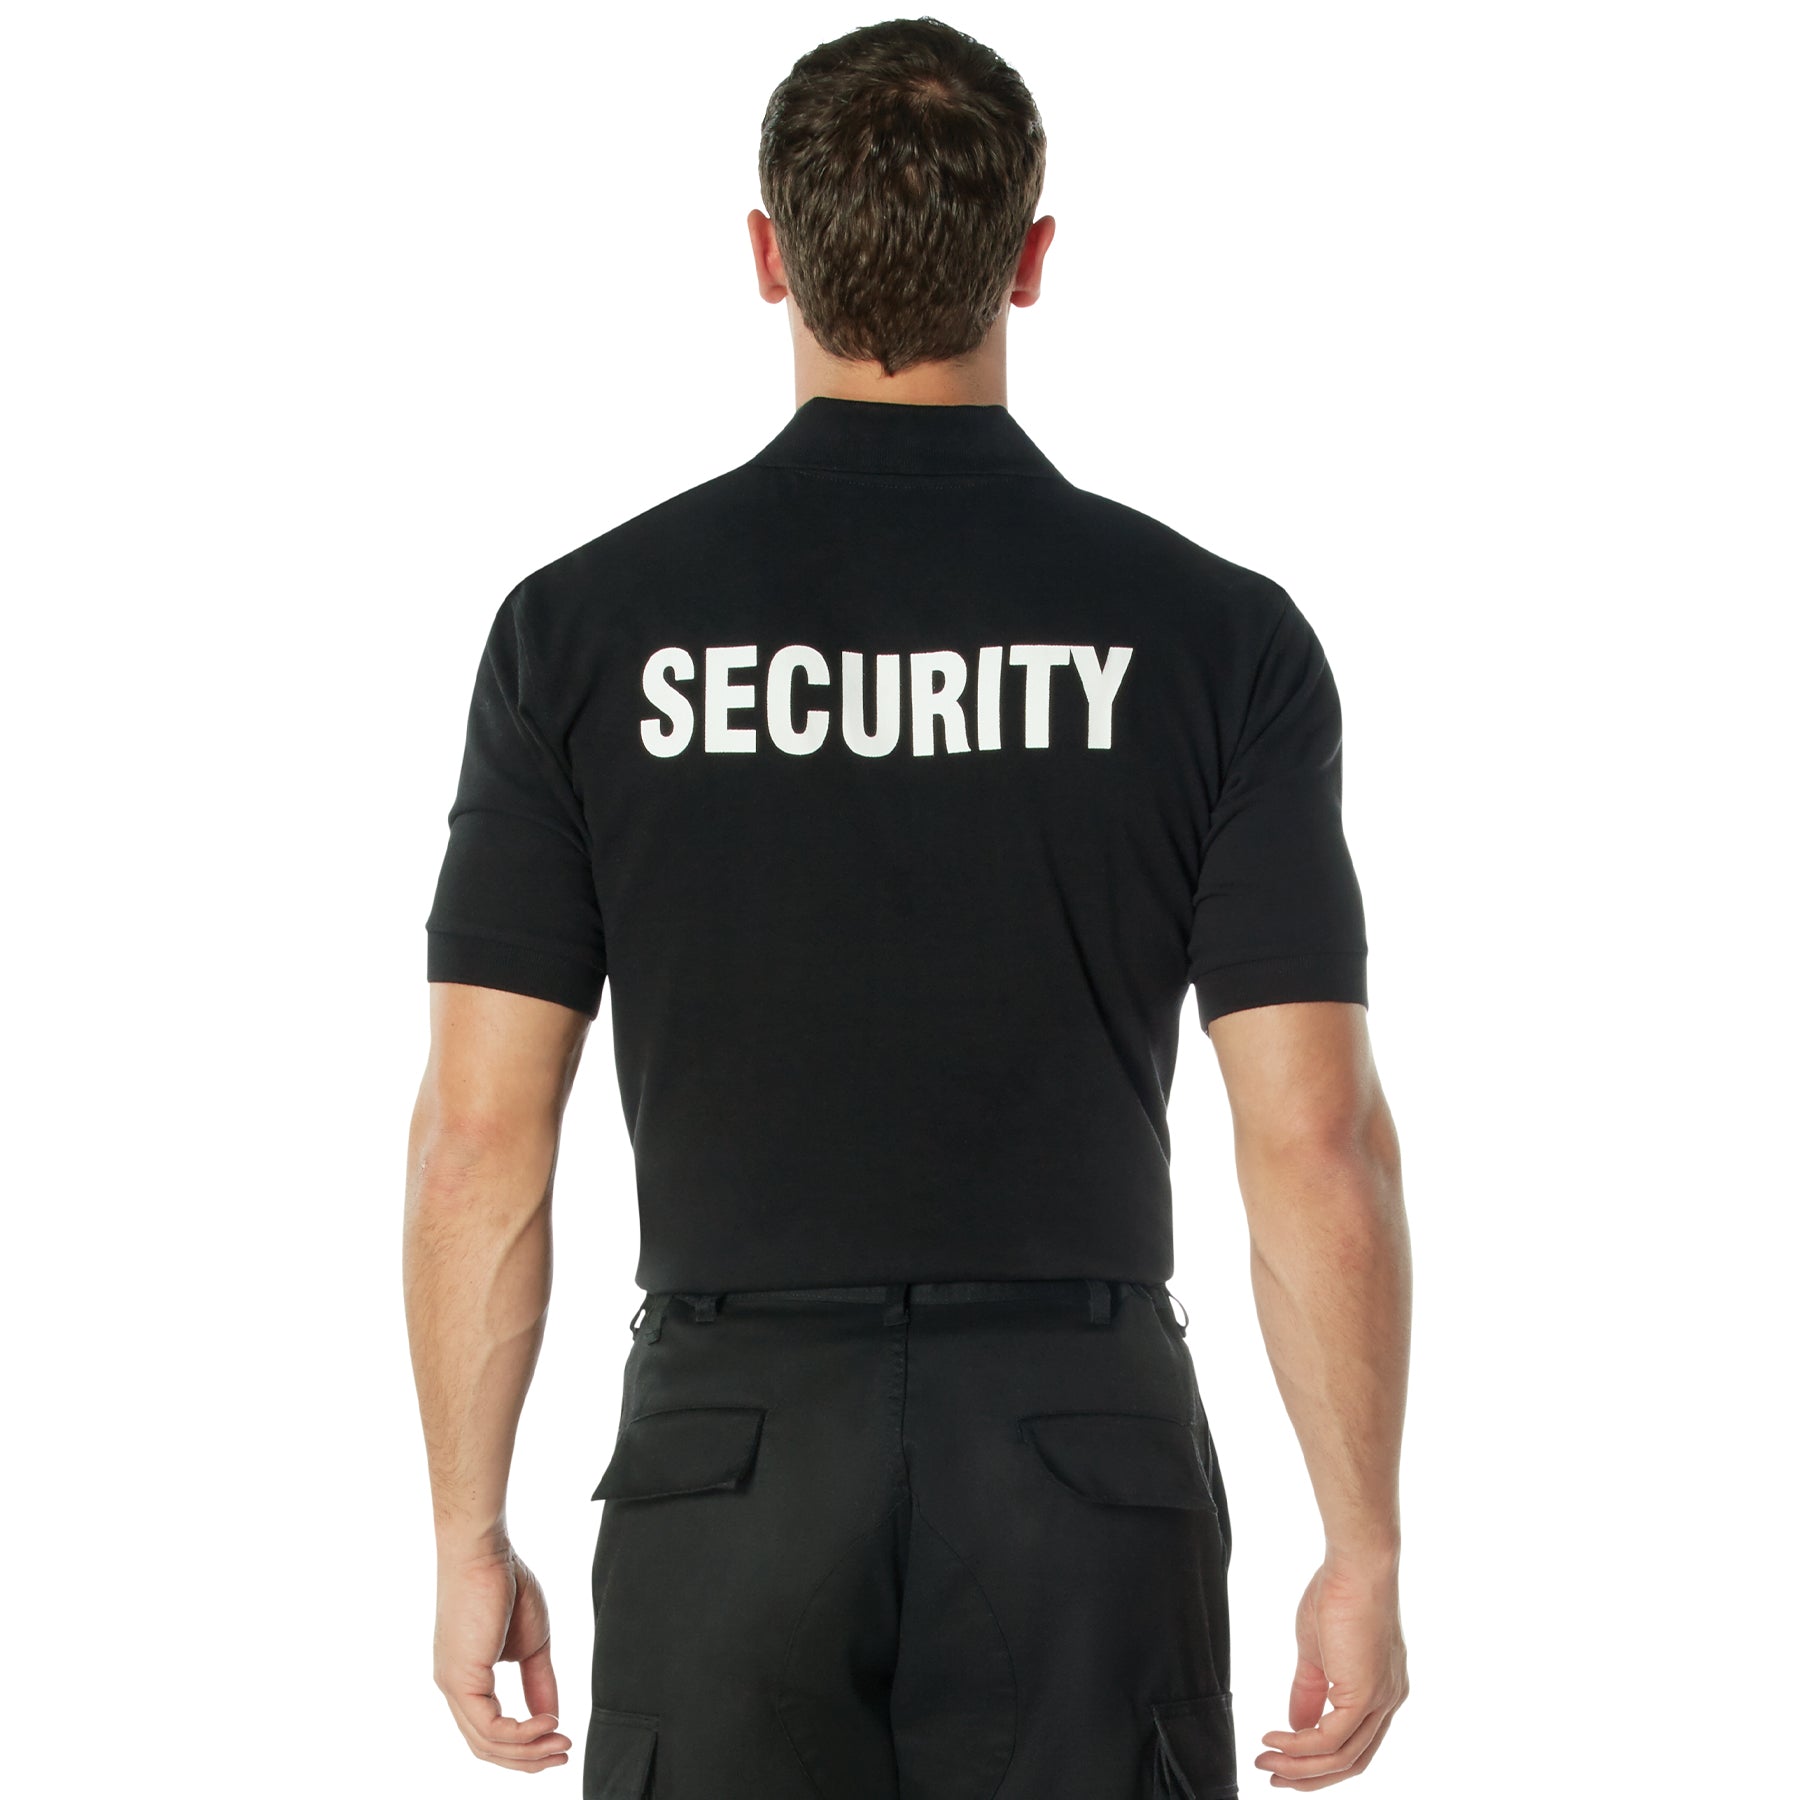 [Public Safety] Cotton Security Polo T-Shirts